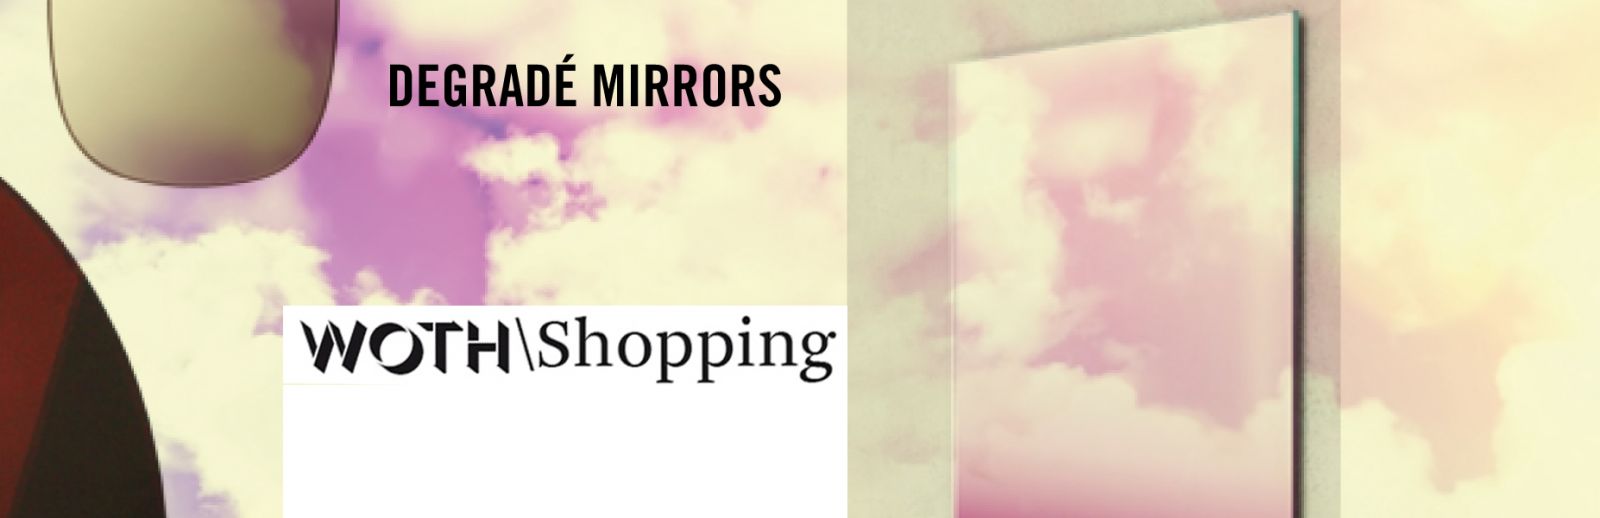 woth_3_things_shopping_mirrors